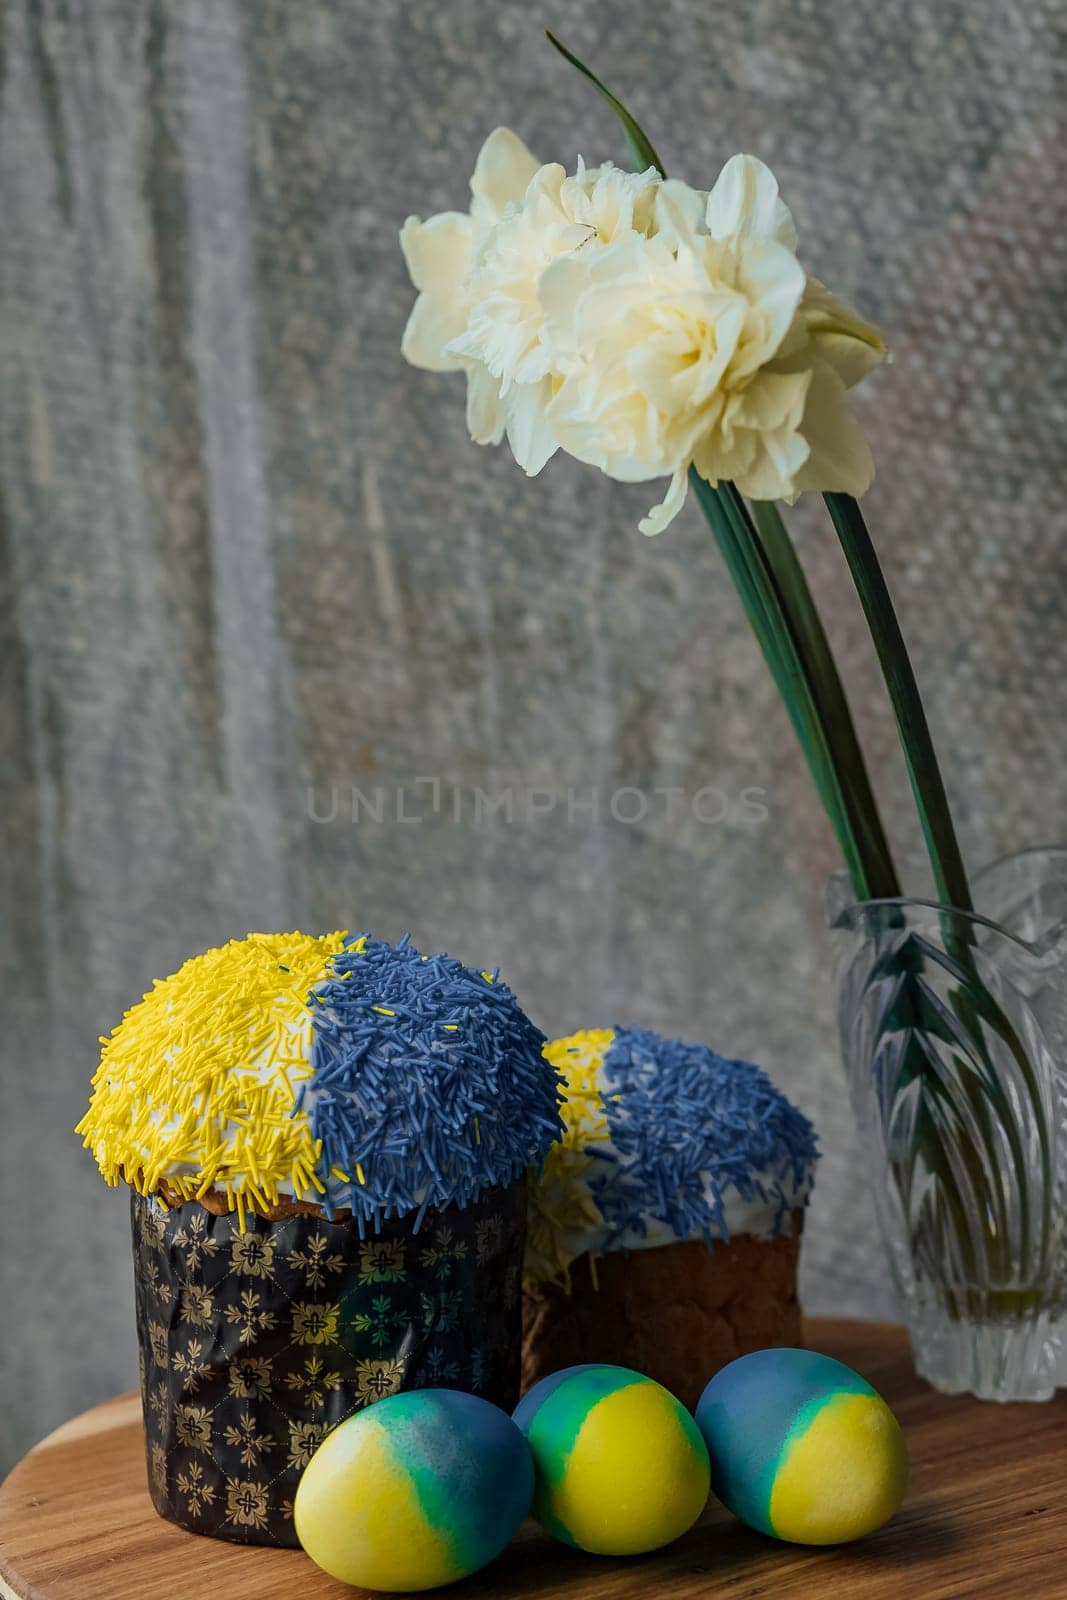 Delicious Easter cake in the colors of the flag of Ukraine, yellow-blue colored Easter eggs on a wooden table with flowers in the background. place for text. selective focus.